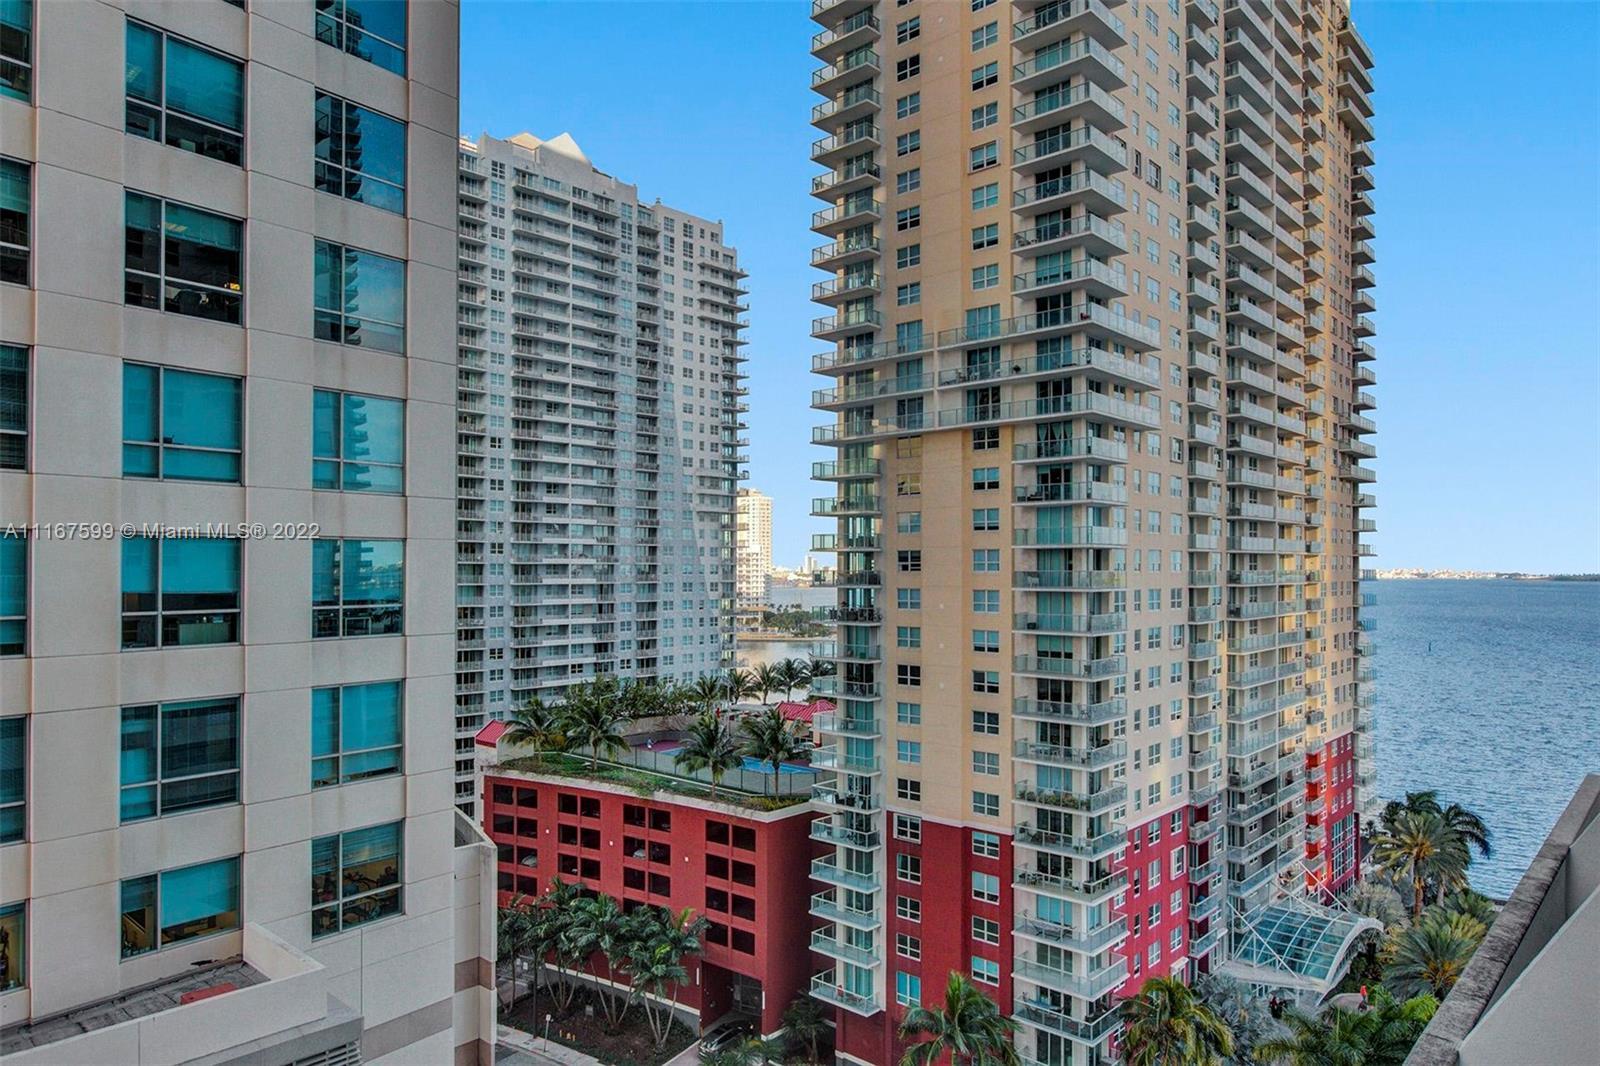 Spacious and bright 1 bedroom 1 bathroom condo in the heart of Brickell. South facing views of the c